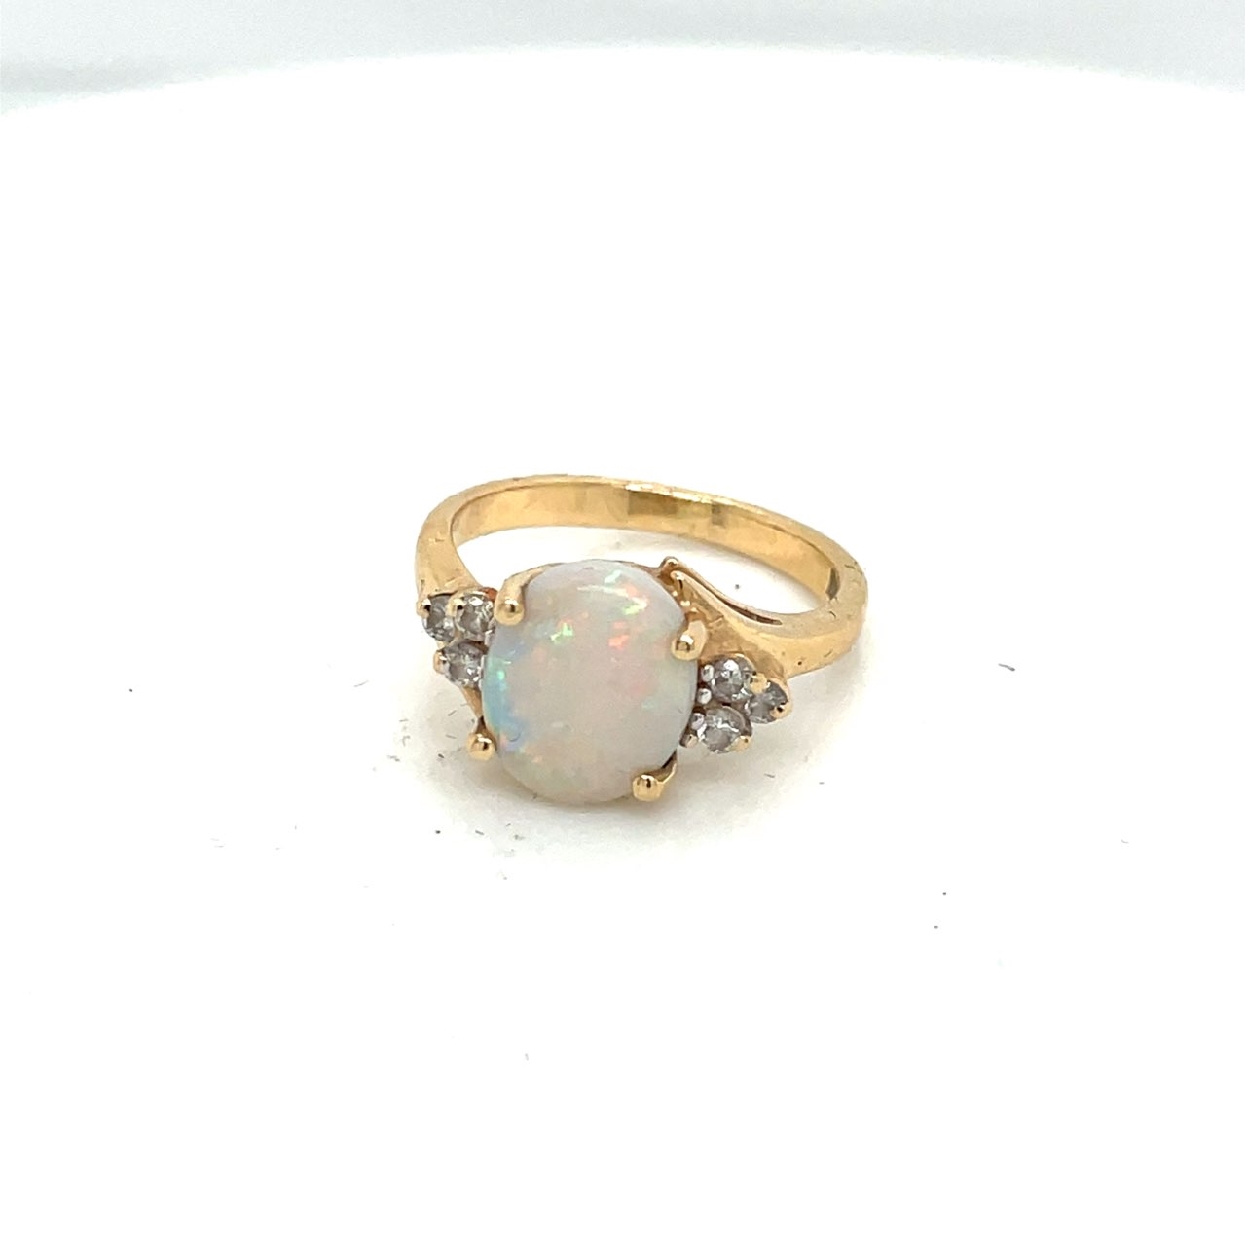 14K Yellow Gold Oval Opal Ring with Diamond Accents

Size 4.75